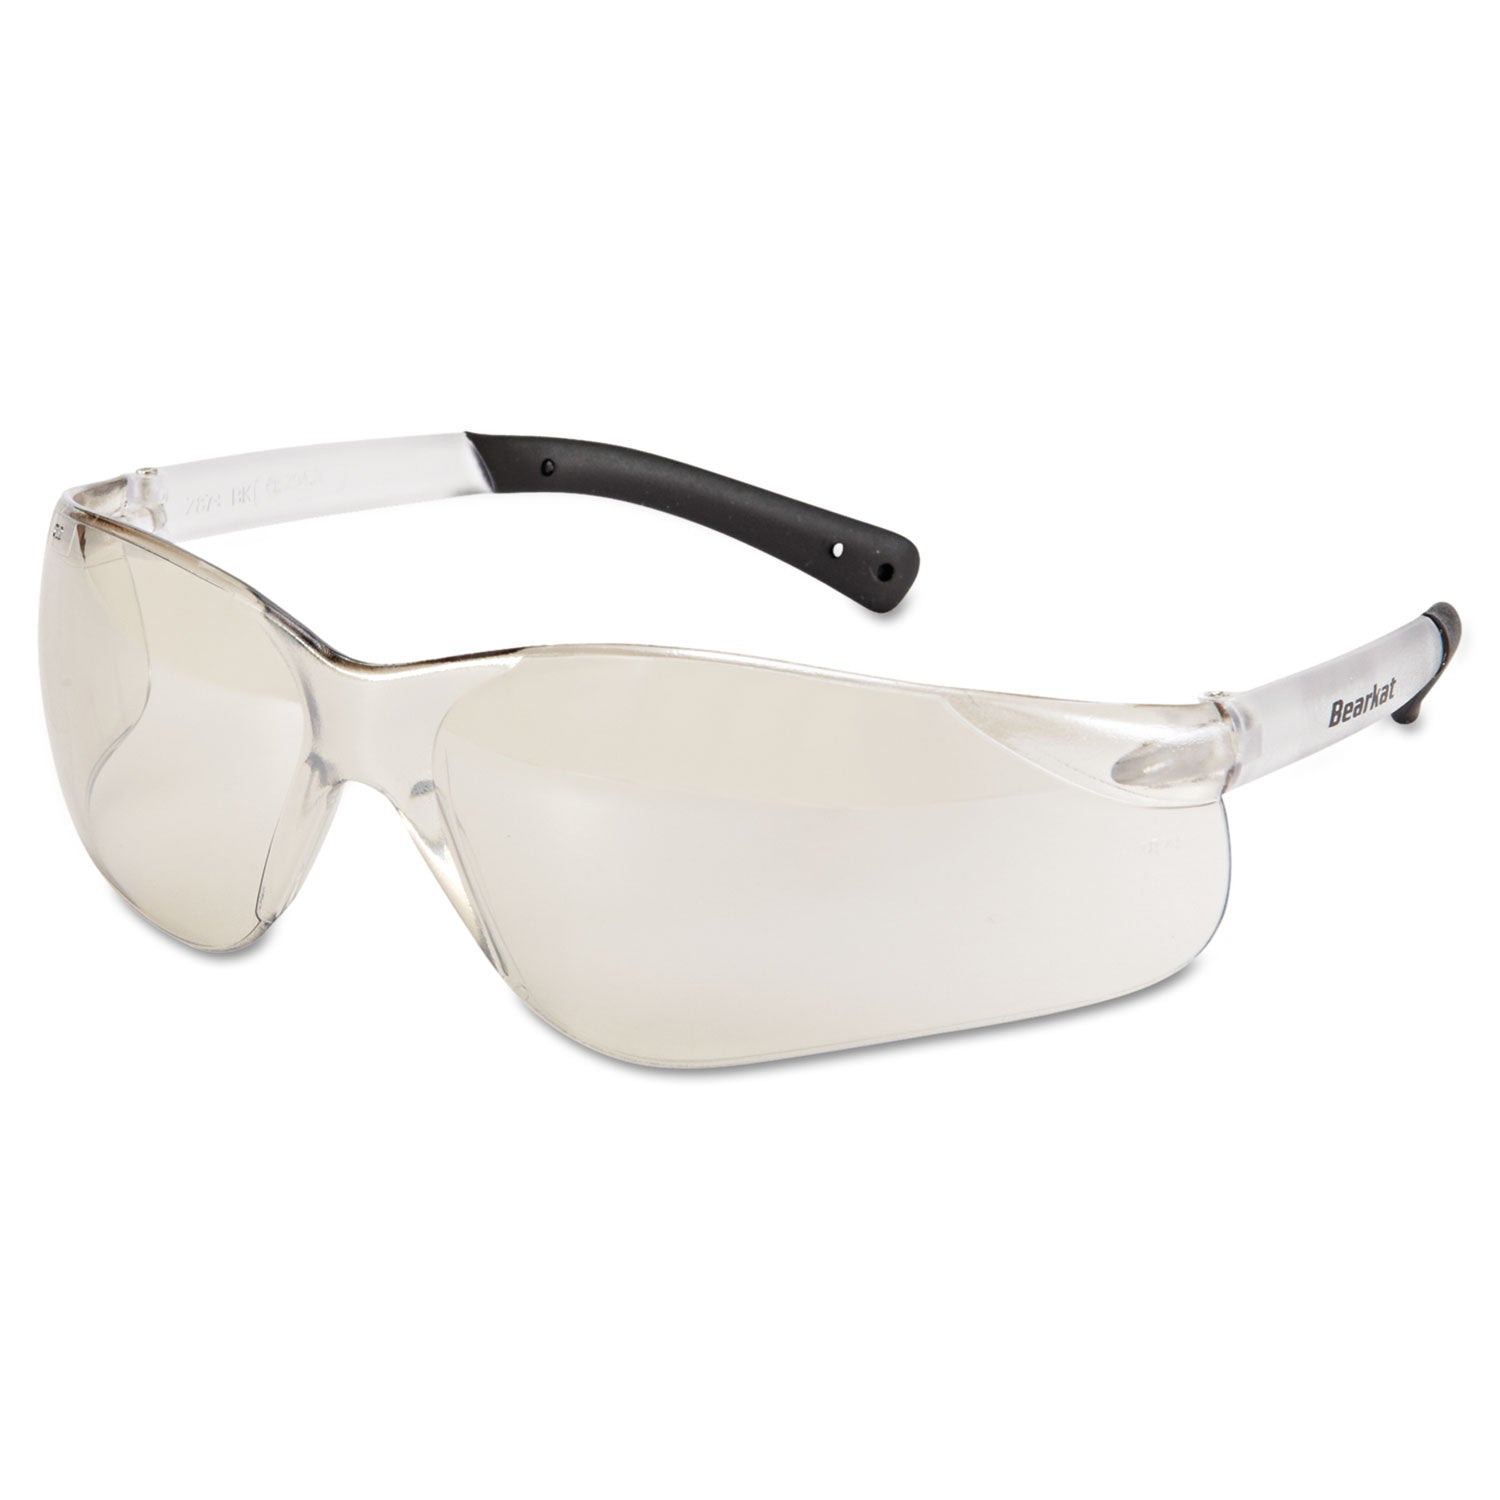 BearKat Safety Glasses, Frost Frame, Clear Mirror Lens, 12/Box - 